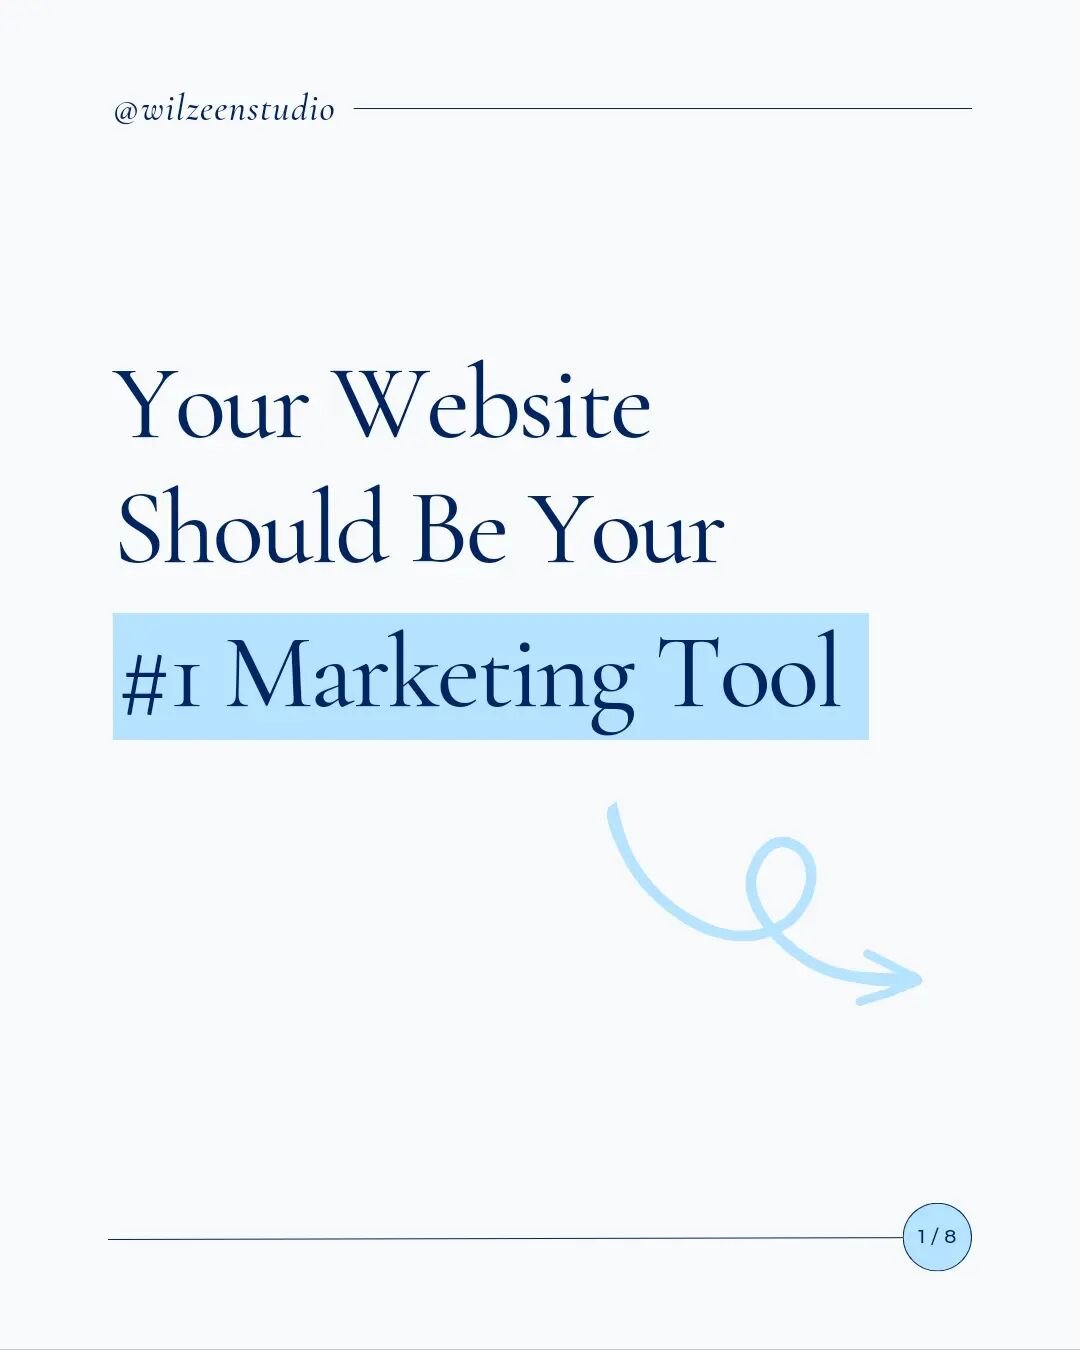 Let me tell you a secret: your website that's just sitting there on the internet can actually be your #1 marketing tool.

Here's 3 things to add to your website to make it your #1 marketing tool:

1. Converting copy that speaks directly to your ideal